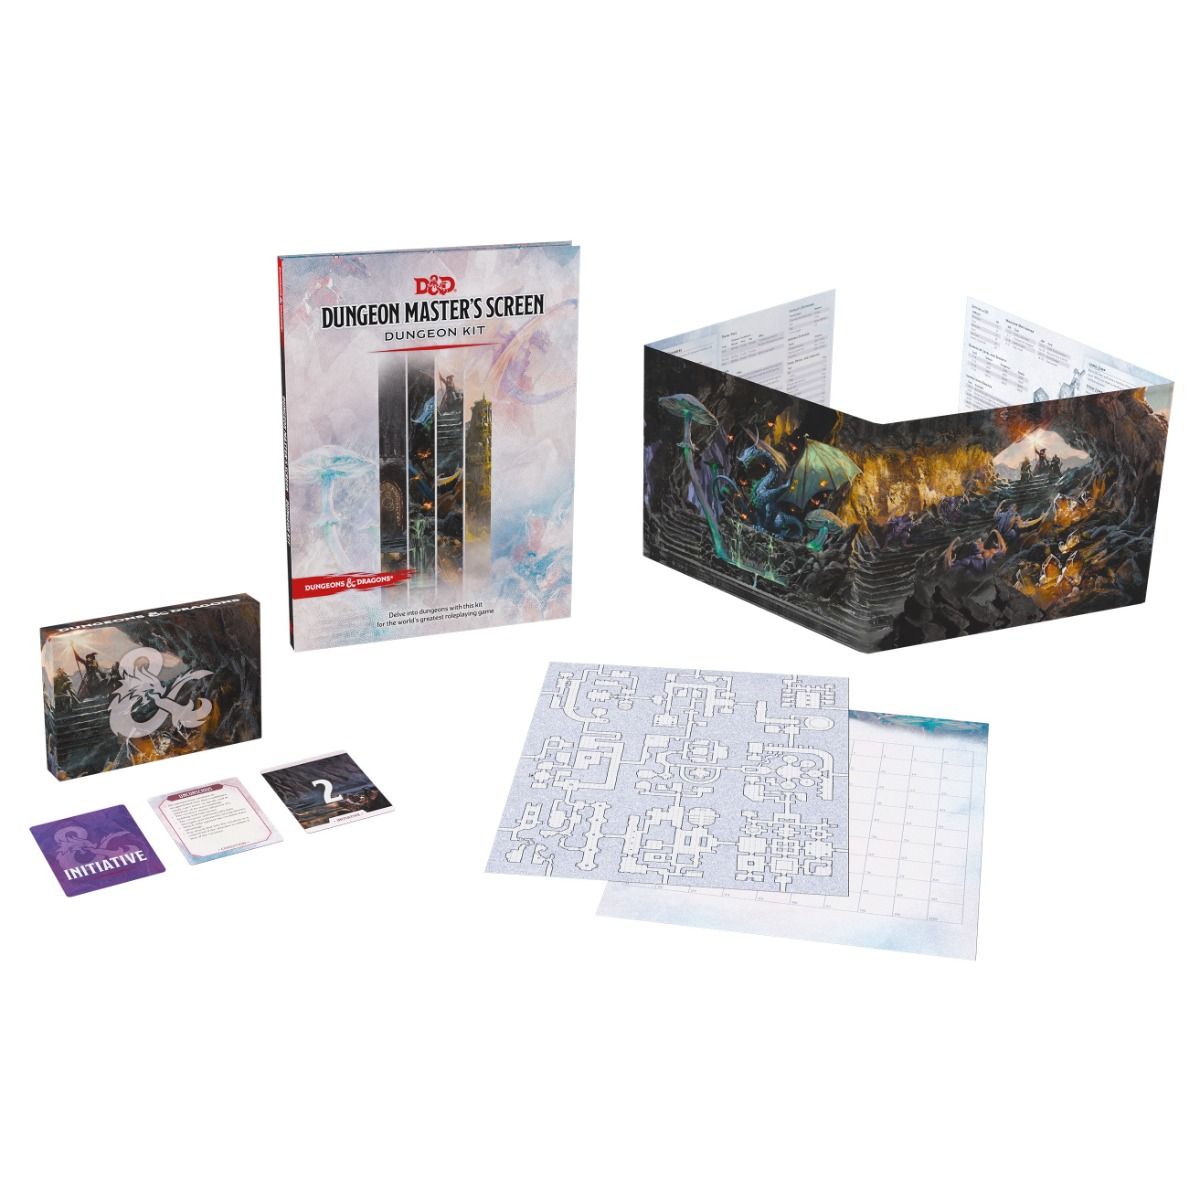 D&D Dungeon Masters Screen - Dungeon Kit